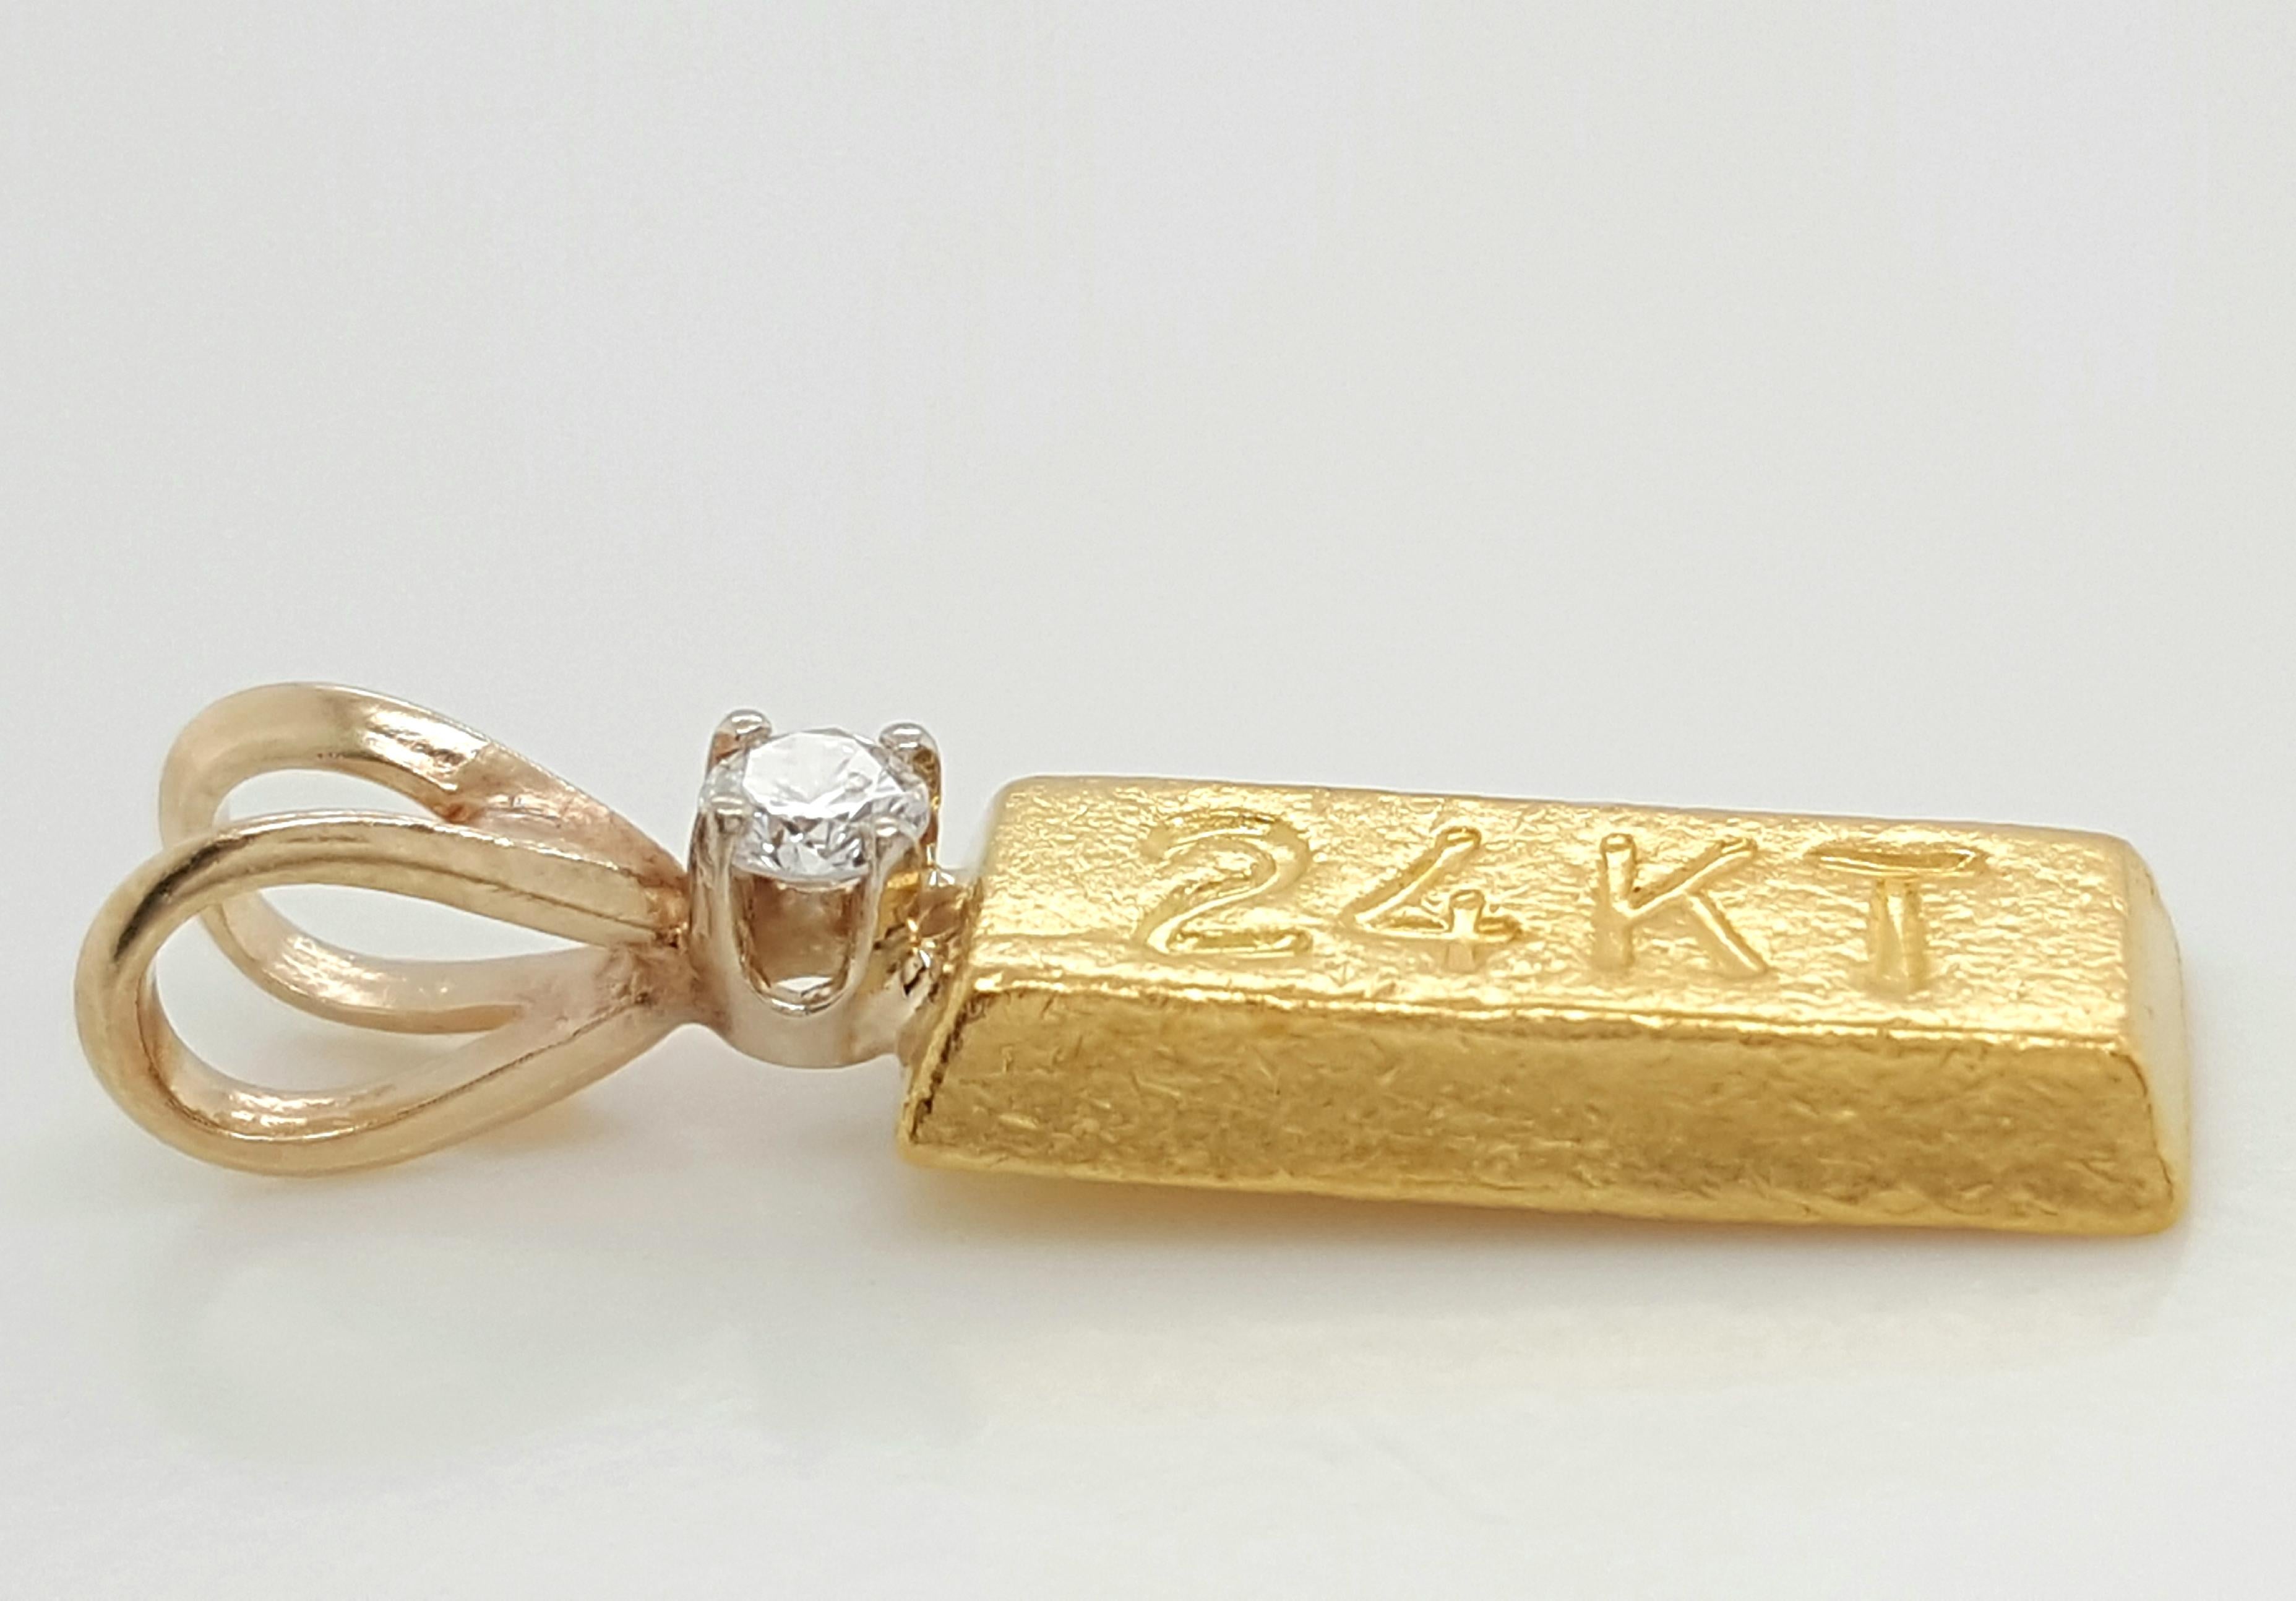 This charm is crafted in 24K yellow gold and has a FVS 0.05 Round Cut diamond on the top. The gold luster is outstanding.

Charm details:
Metal: 24 Karat Yellow Gold (14K Bail)
Weight: 3.5 grams

